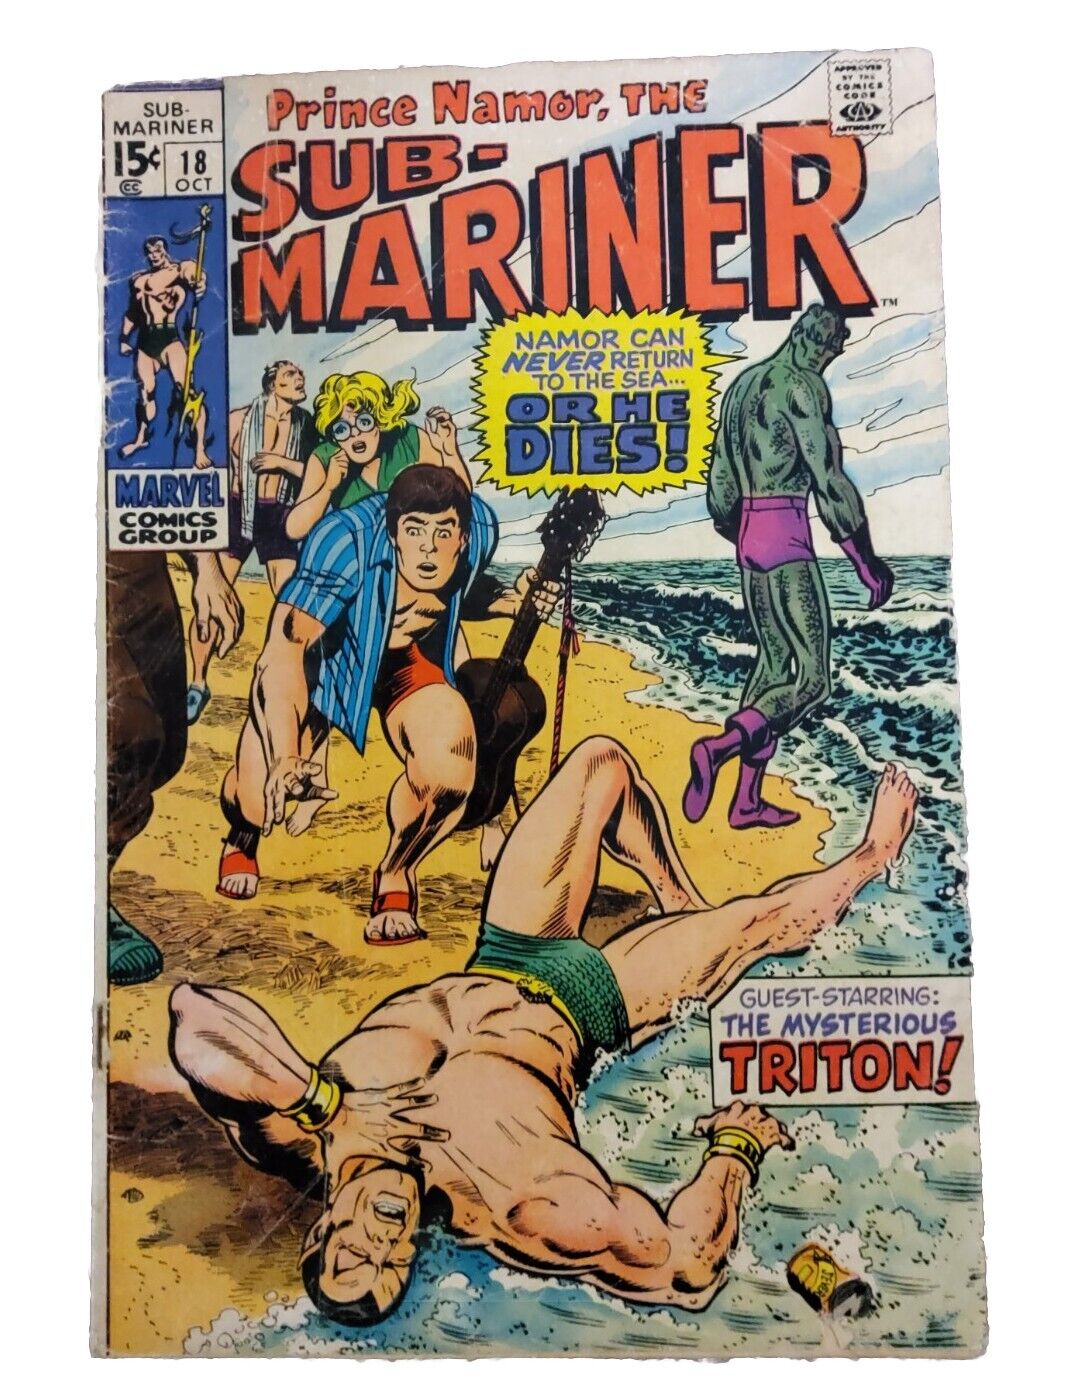 SUB-MARINER #18 (1969) - GRADE 7.5 - GUEST-STARRING THE MYSTERIOUS TRITON